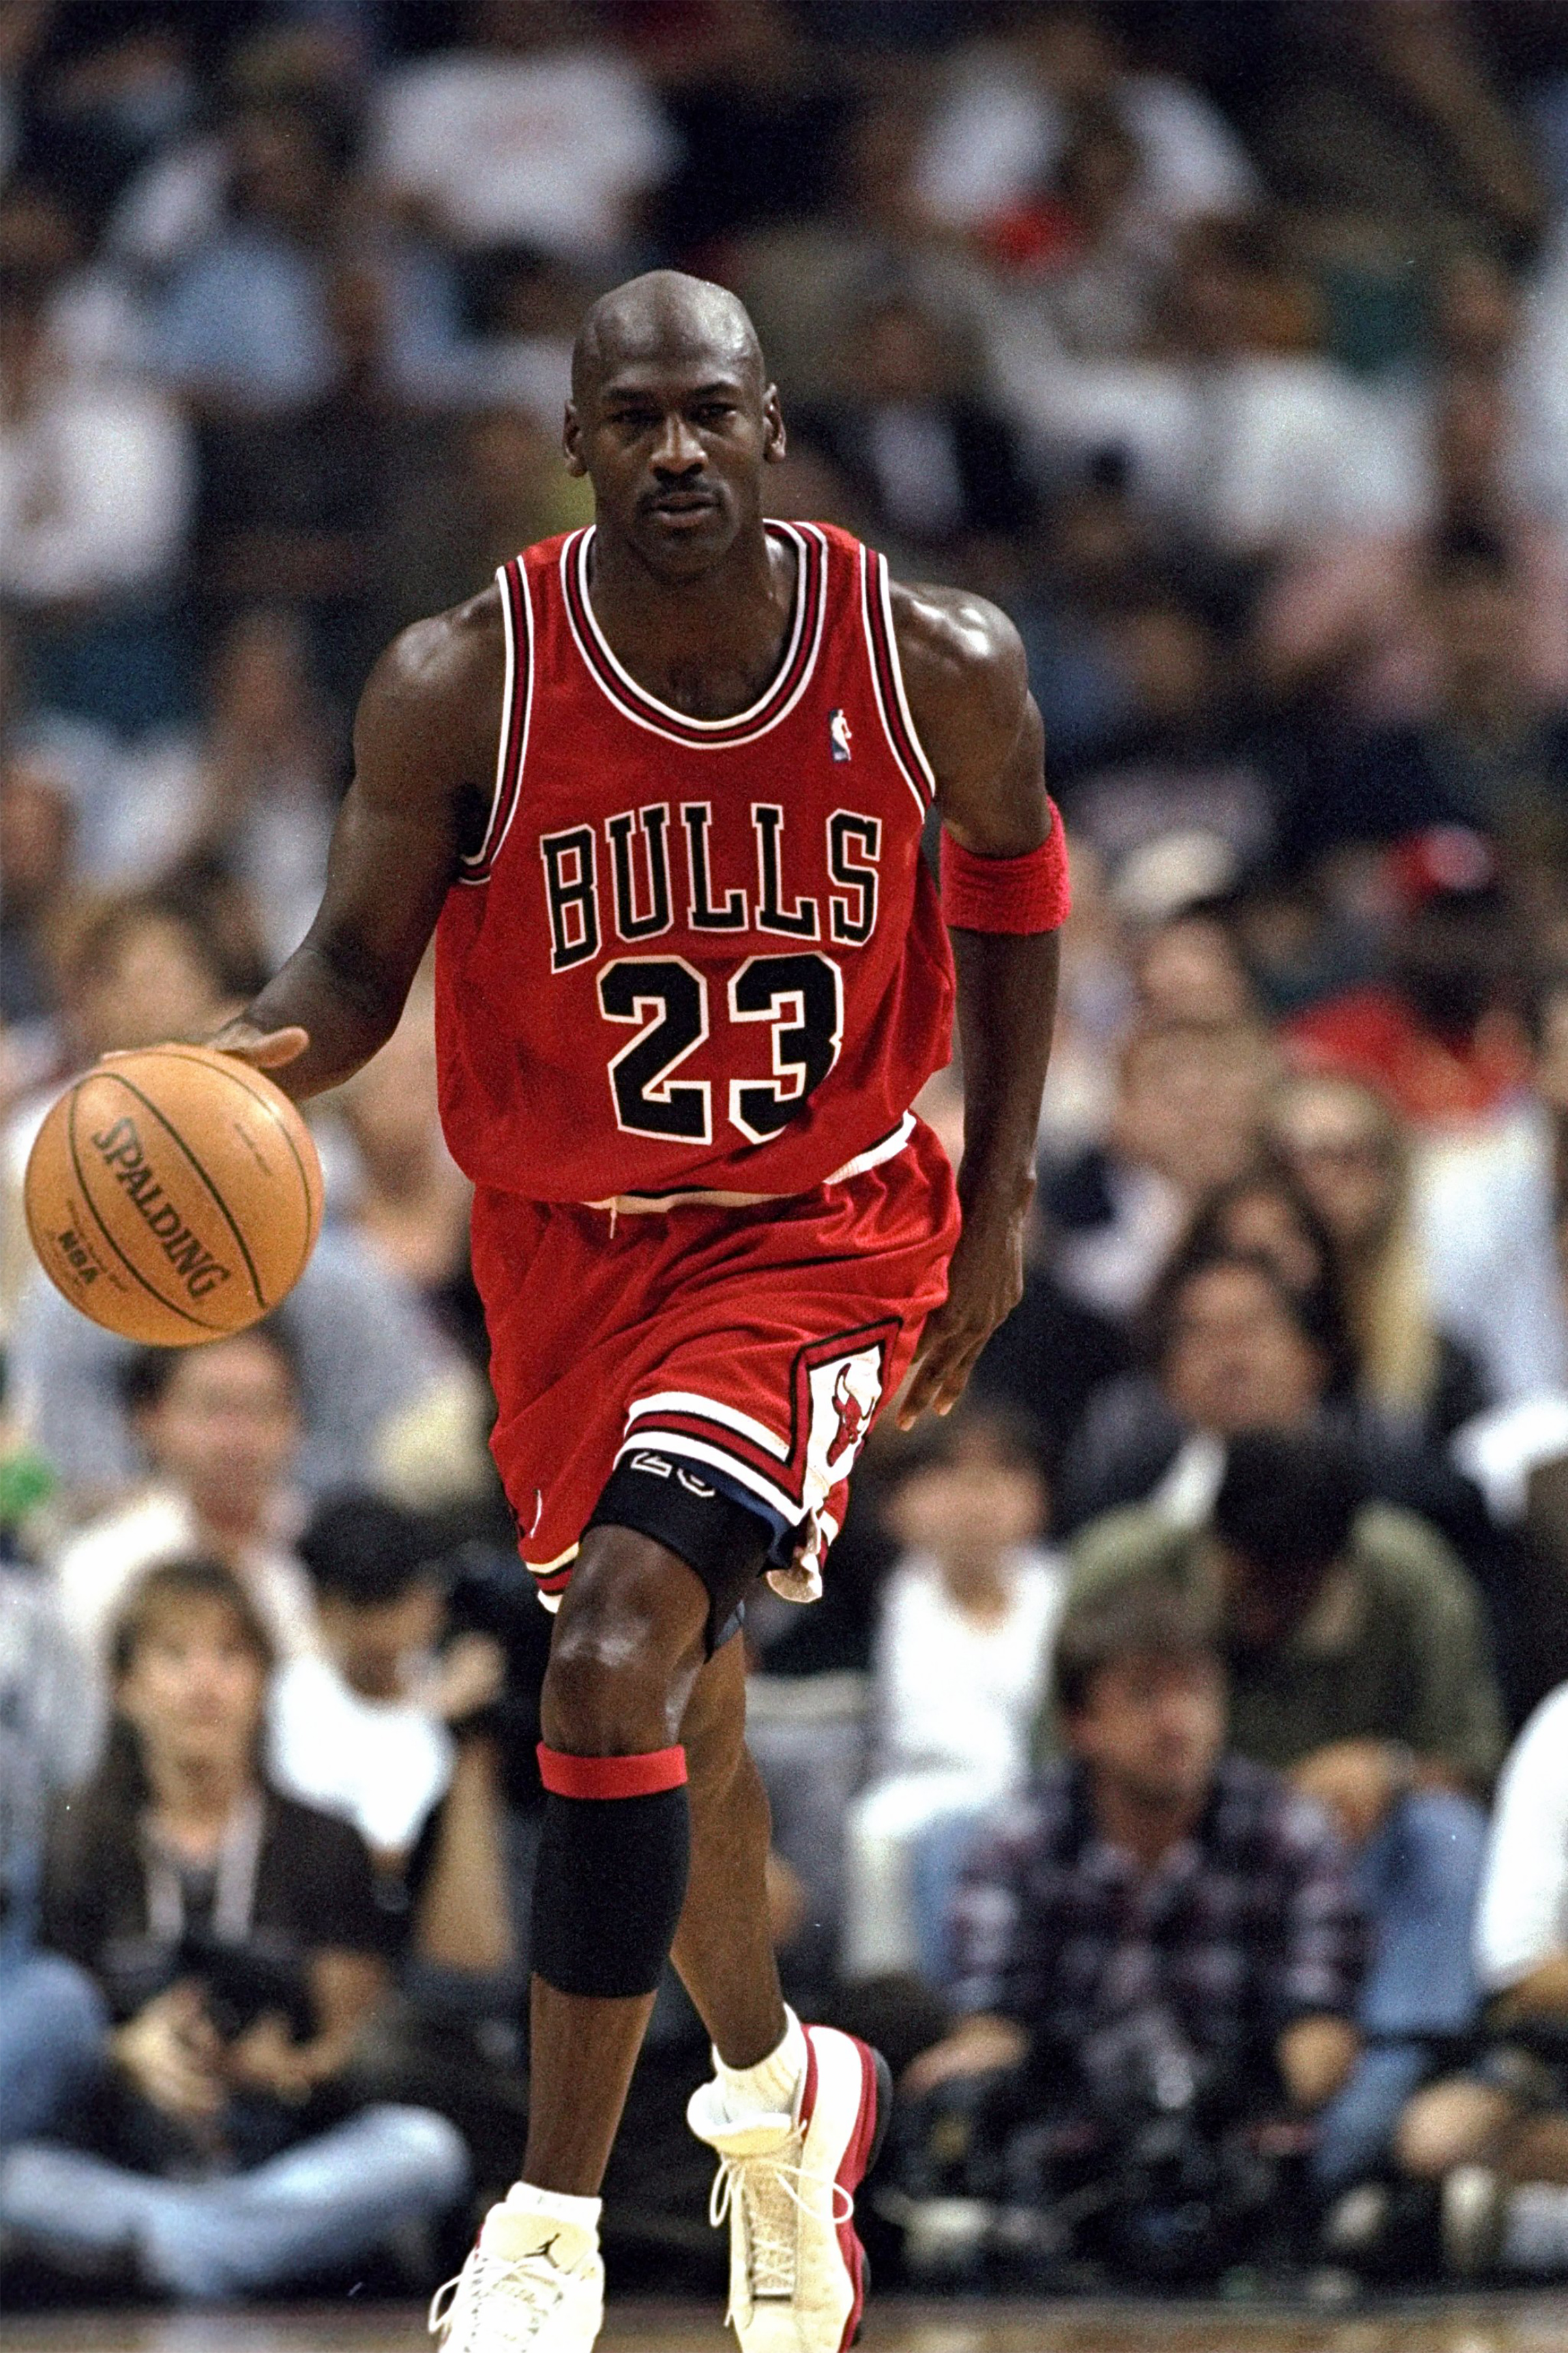 Michael Jordan of the Chicago Bulls in action against the Miami Heat during a game at the Miami Arena in Miami, Florida. (Andy Lyons—Allsports/Getty Images)